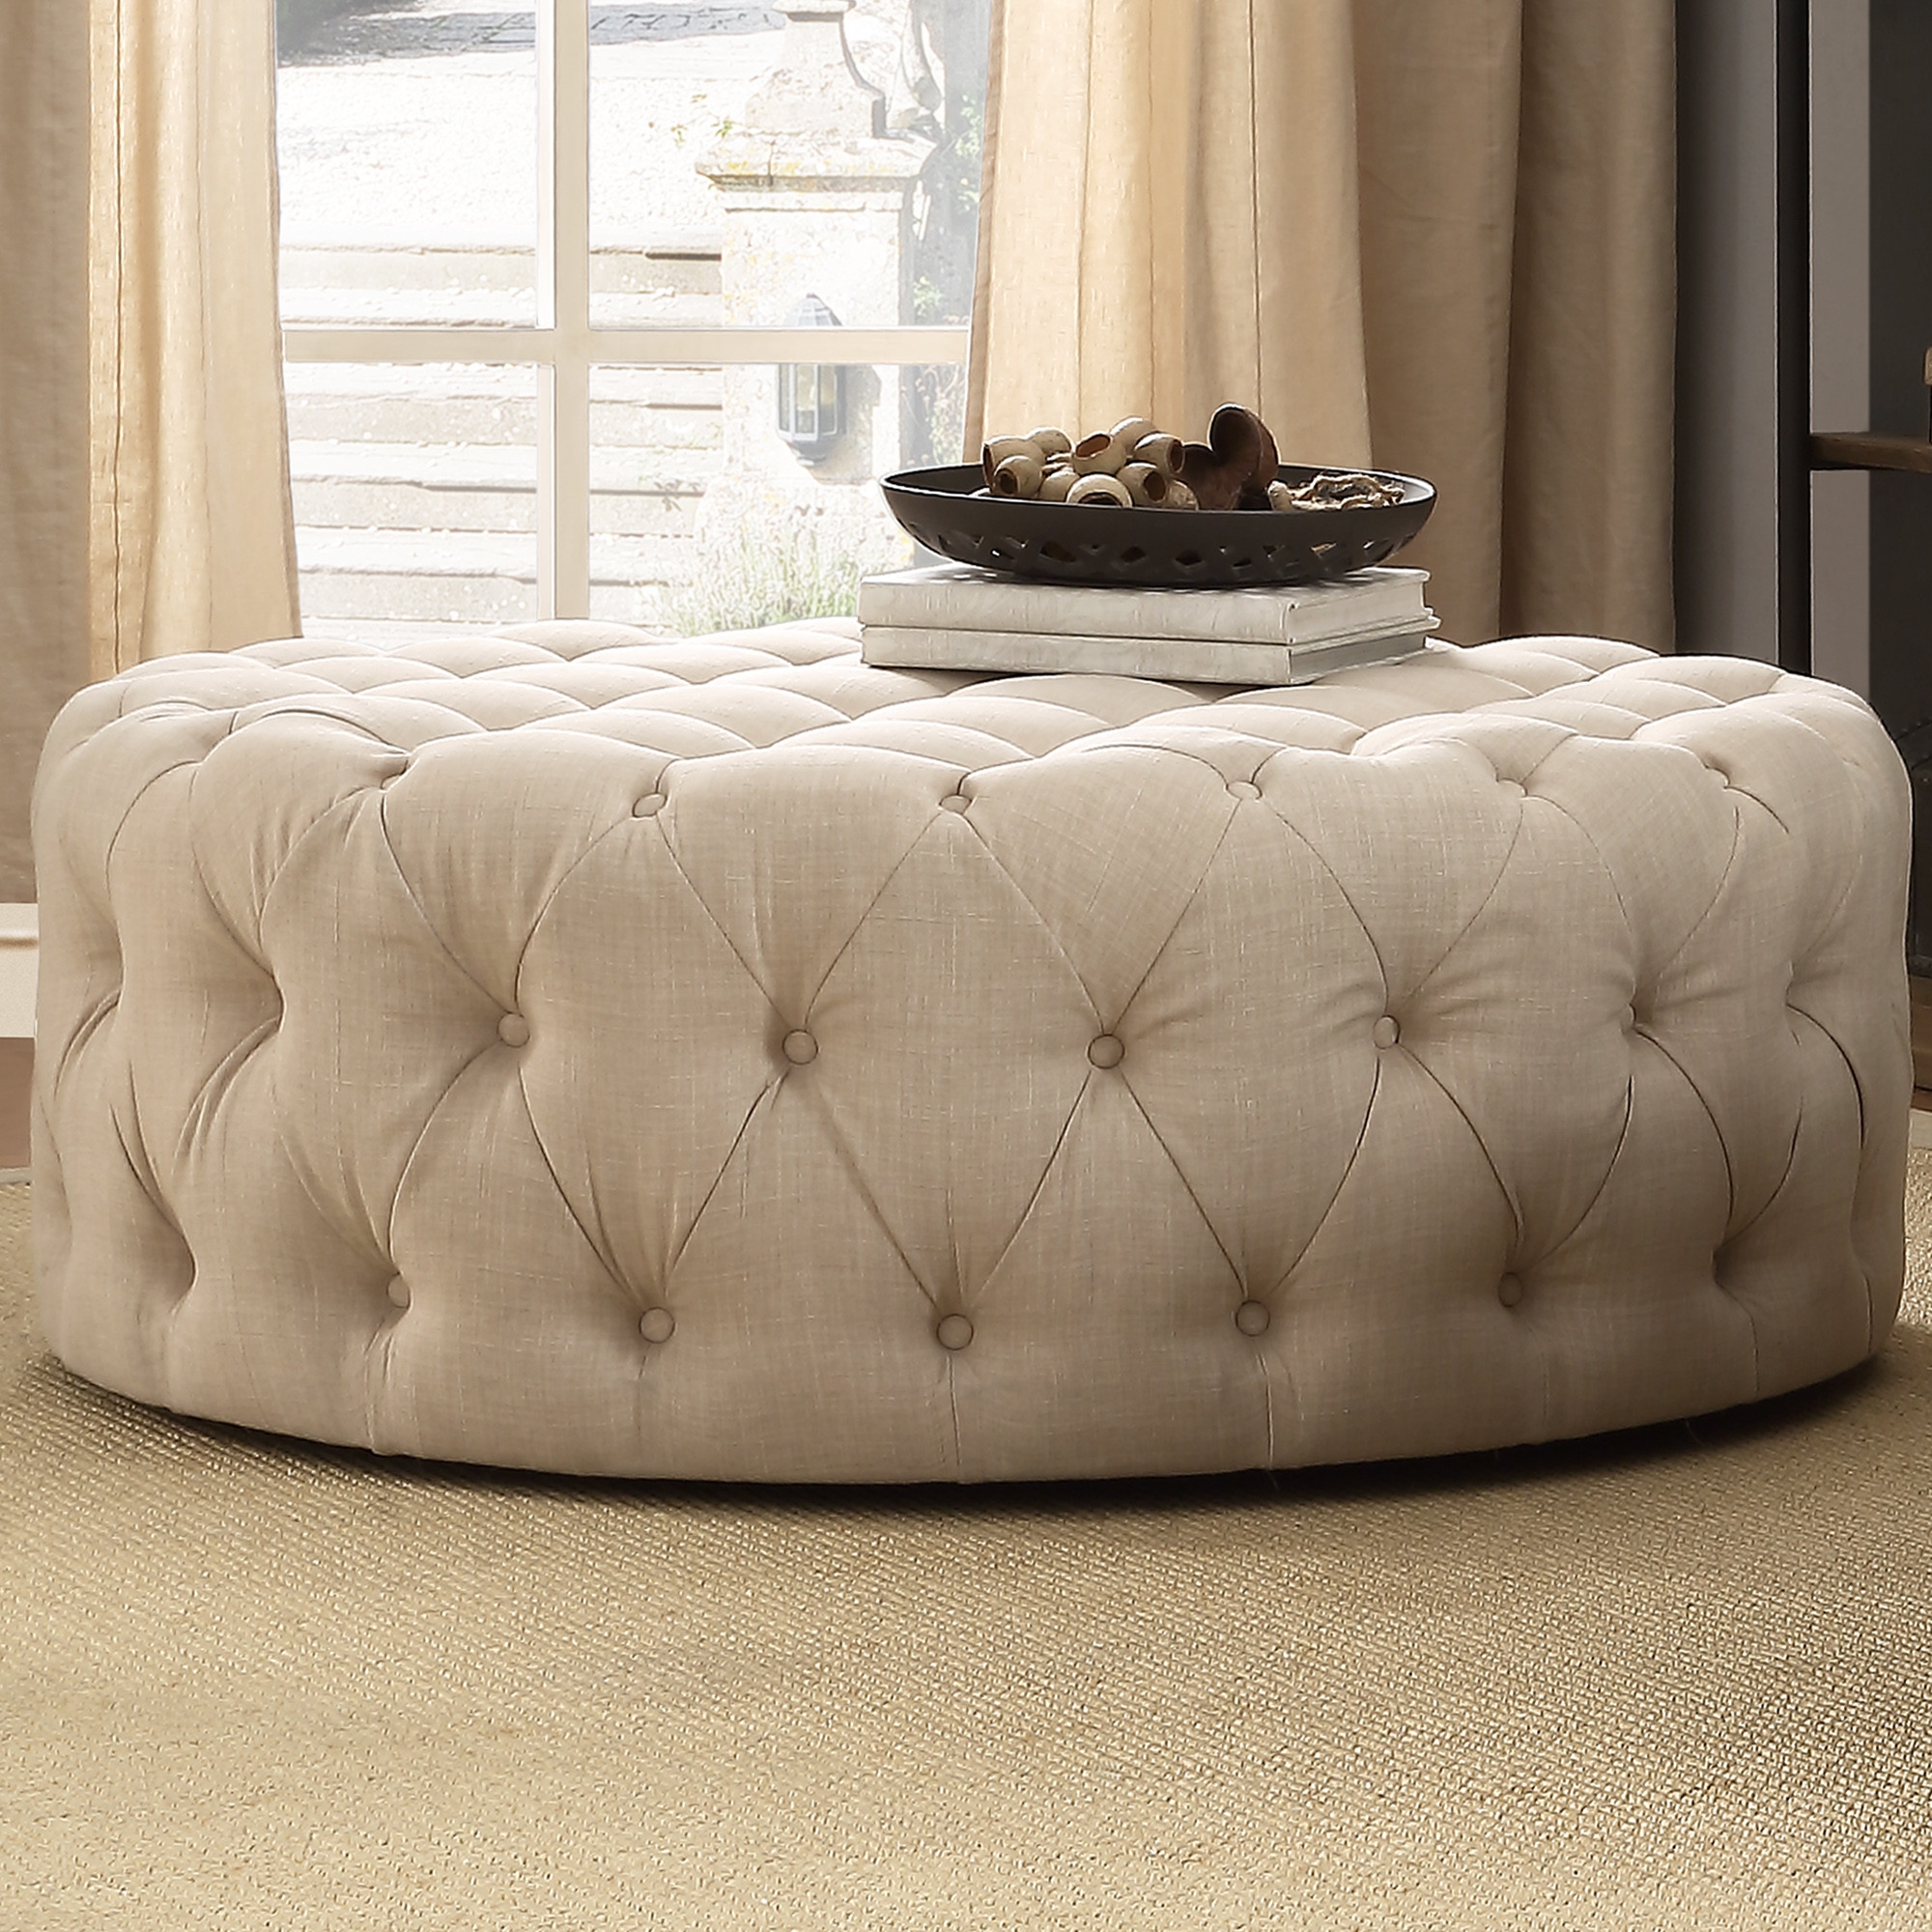 Bourges Round Tufted Cocktail Ottoman - Beige - Image 2